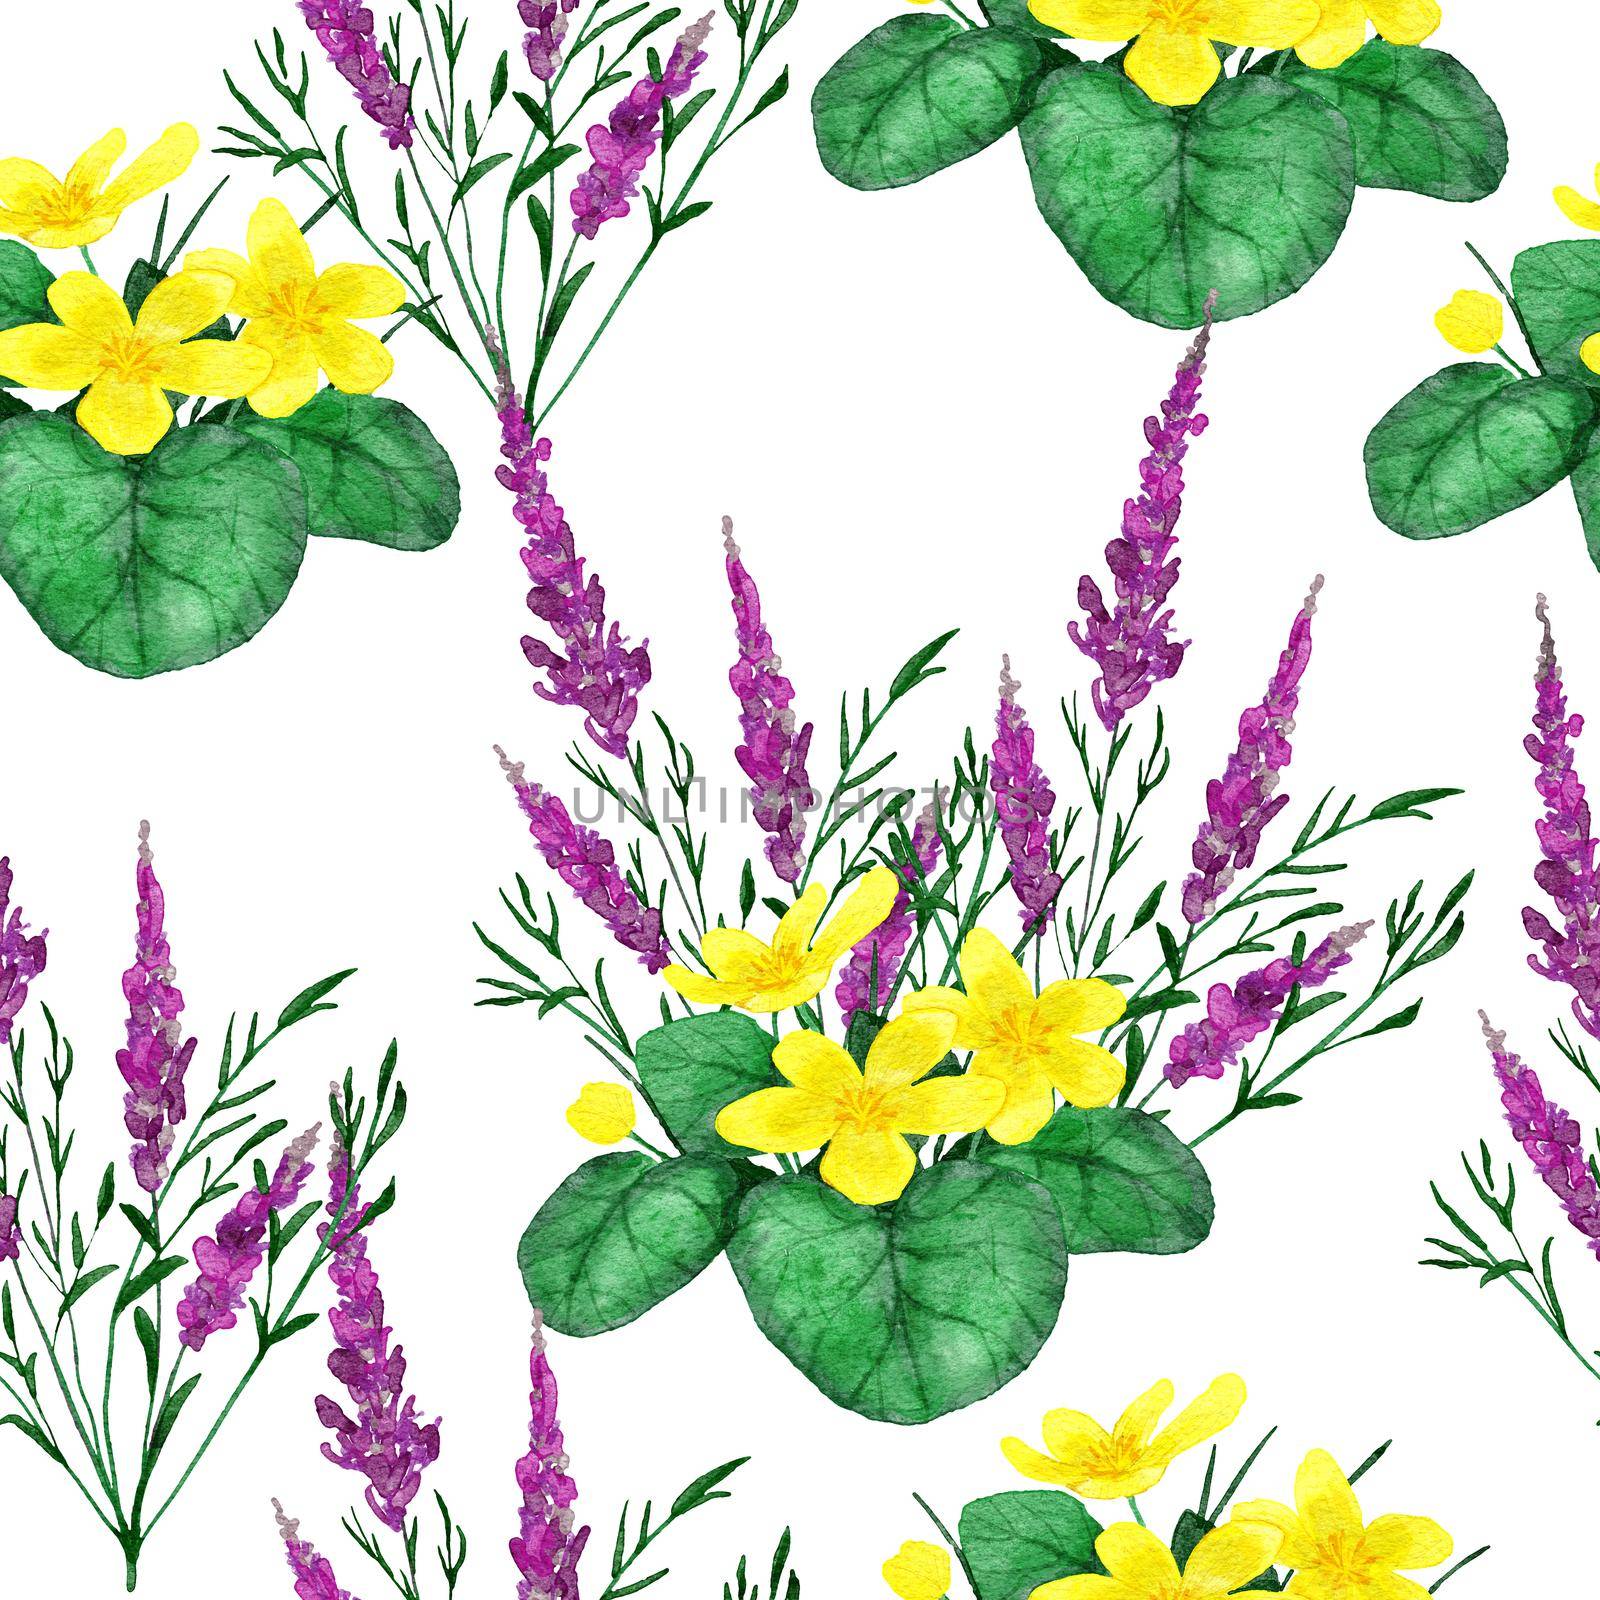 Hand drawn watercolor seamless pattern with river wild flowers, floral wildlife natural background with purple fireweed yellow trollius green leaf leaves meadow design